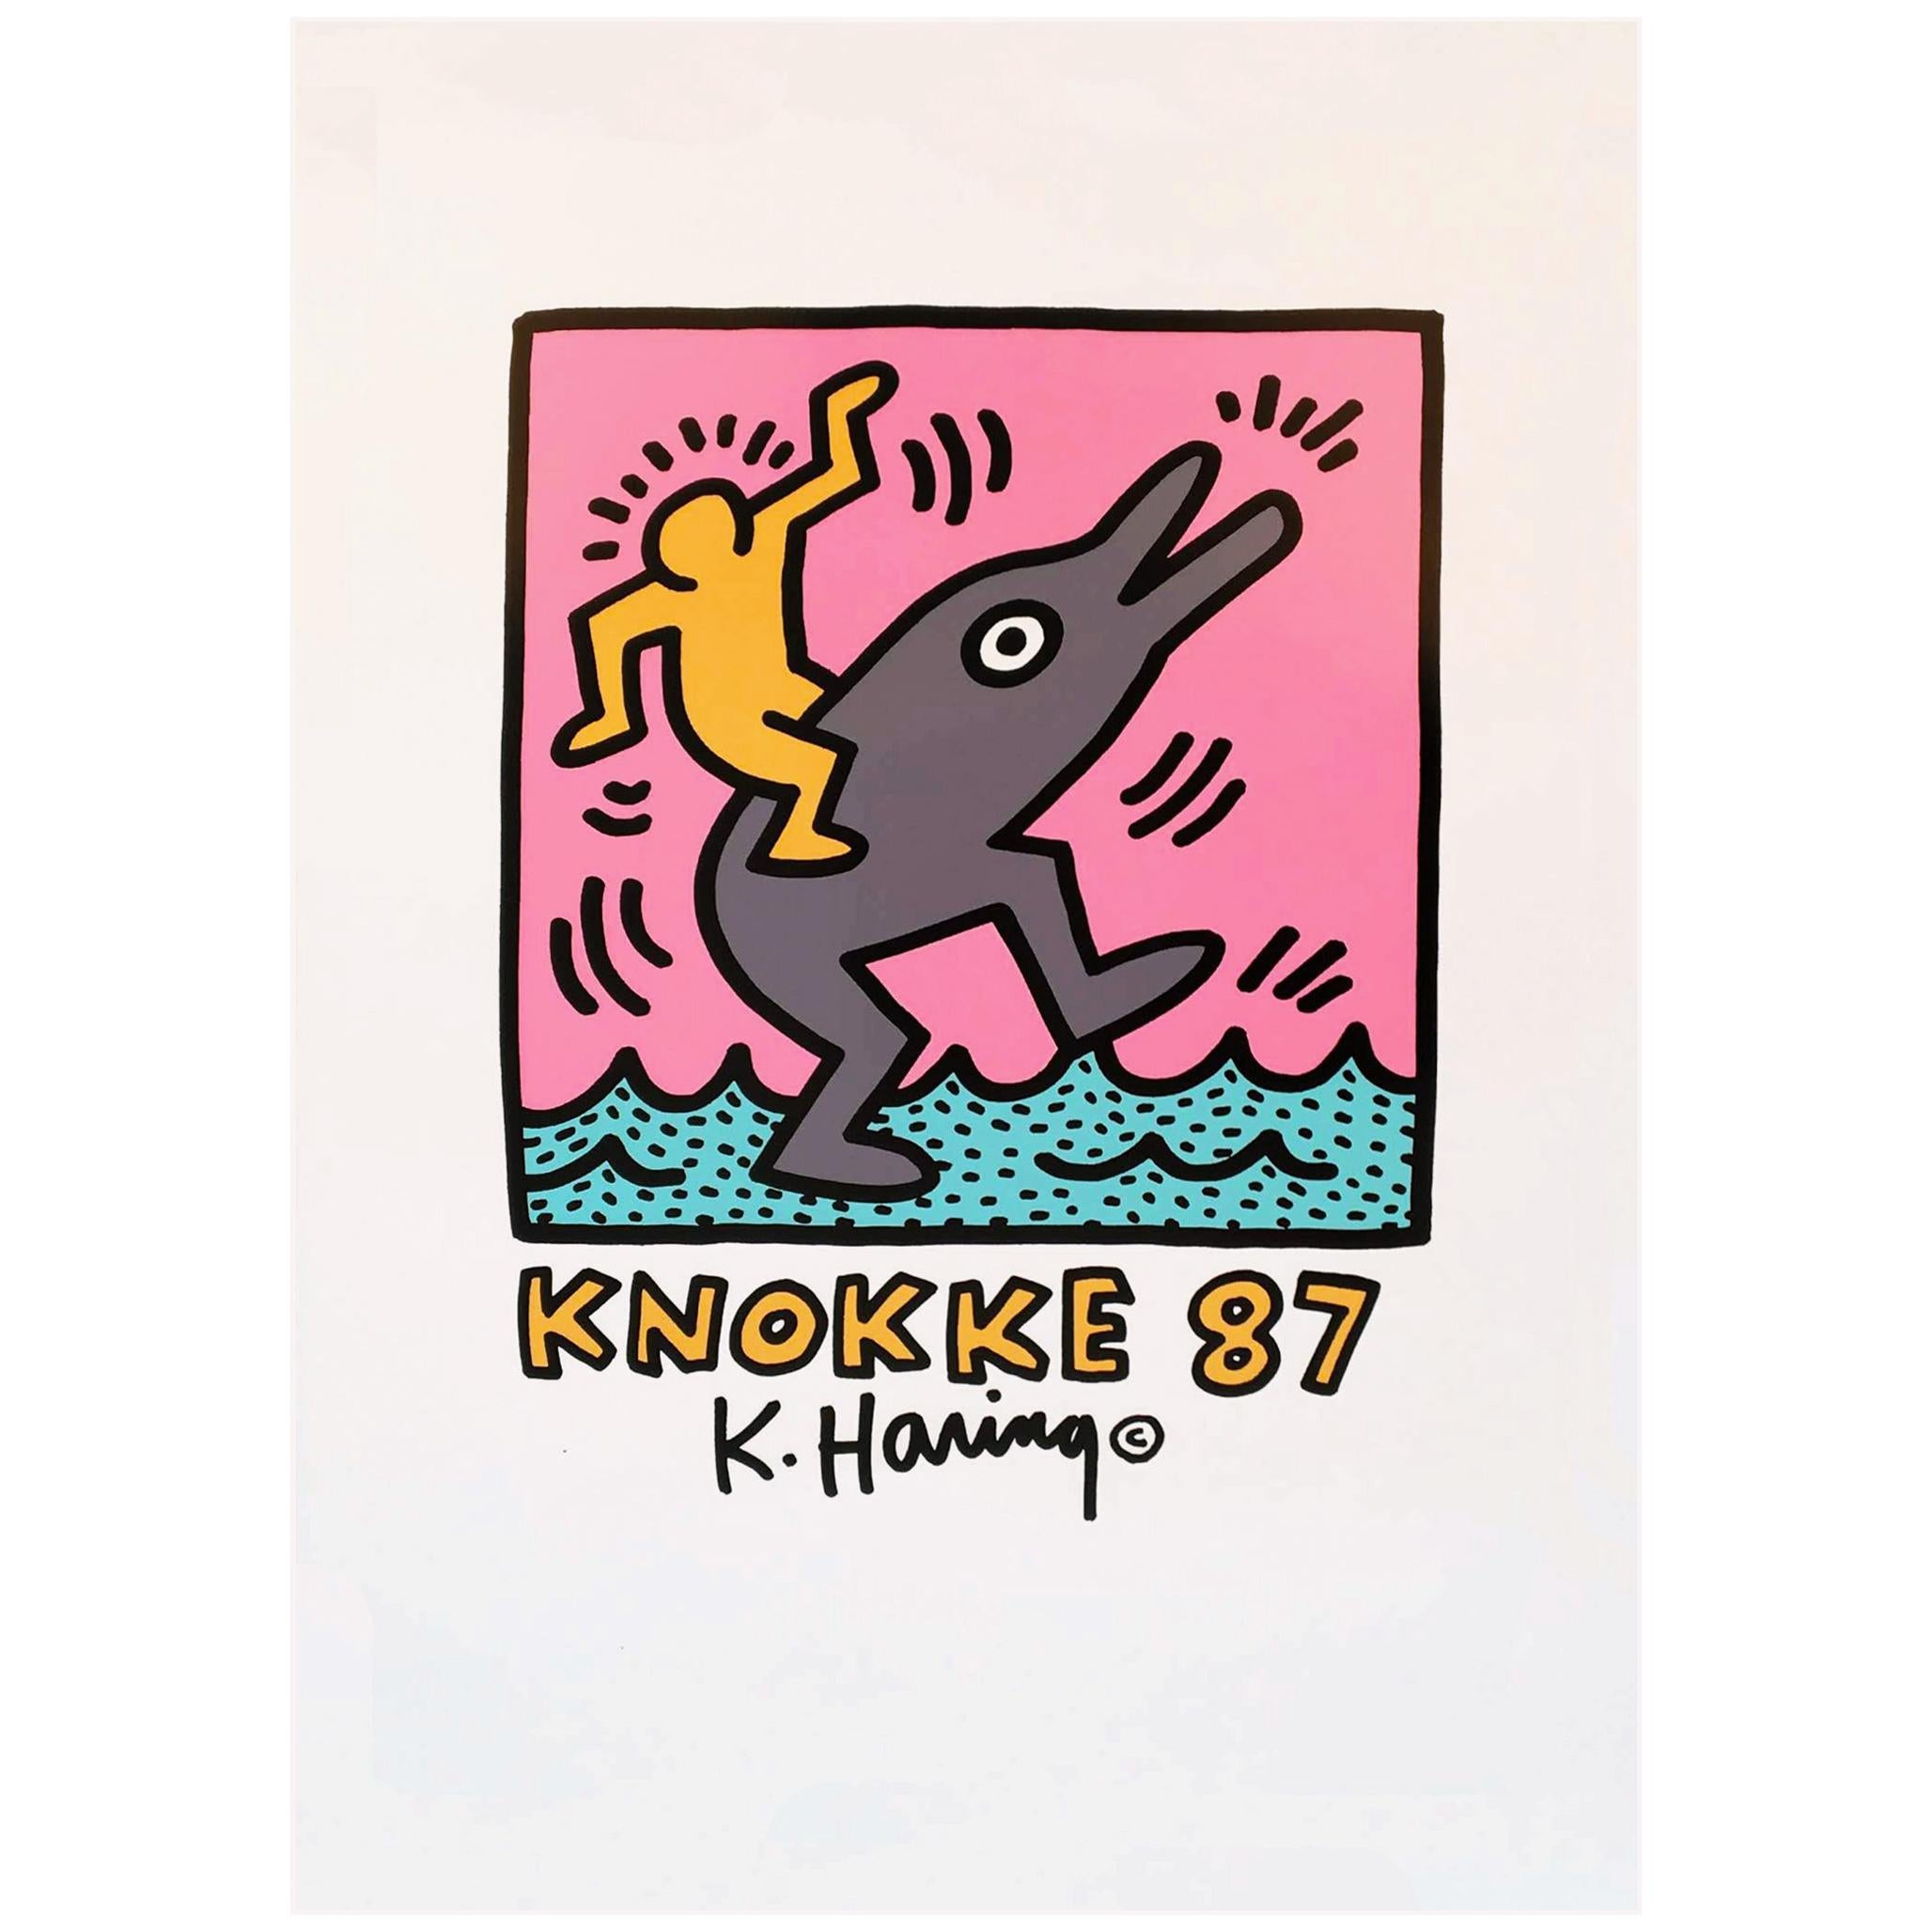 Keith Haring 'Casino Knokke' Rare Original 1987 Poster Print on Fine Paper For Sale